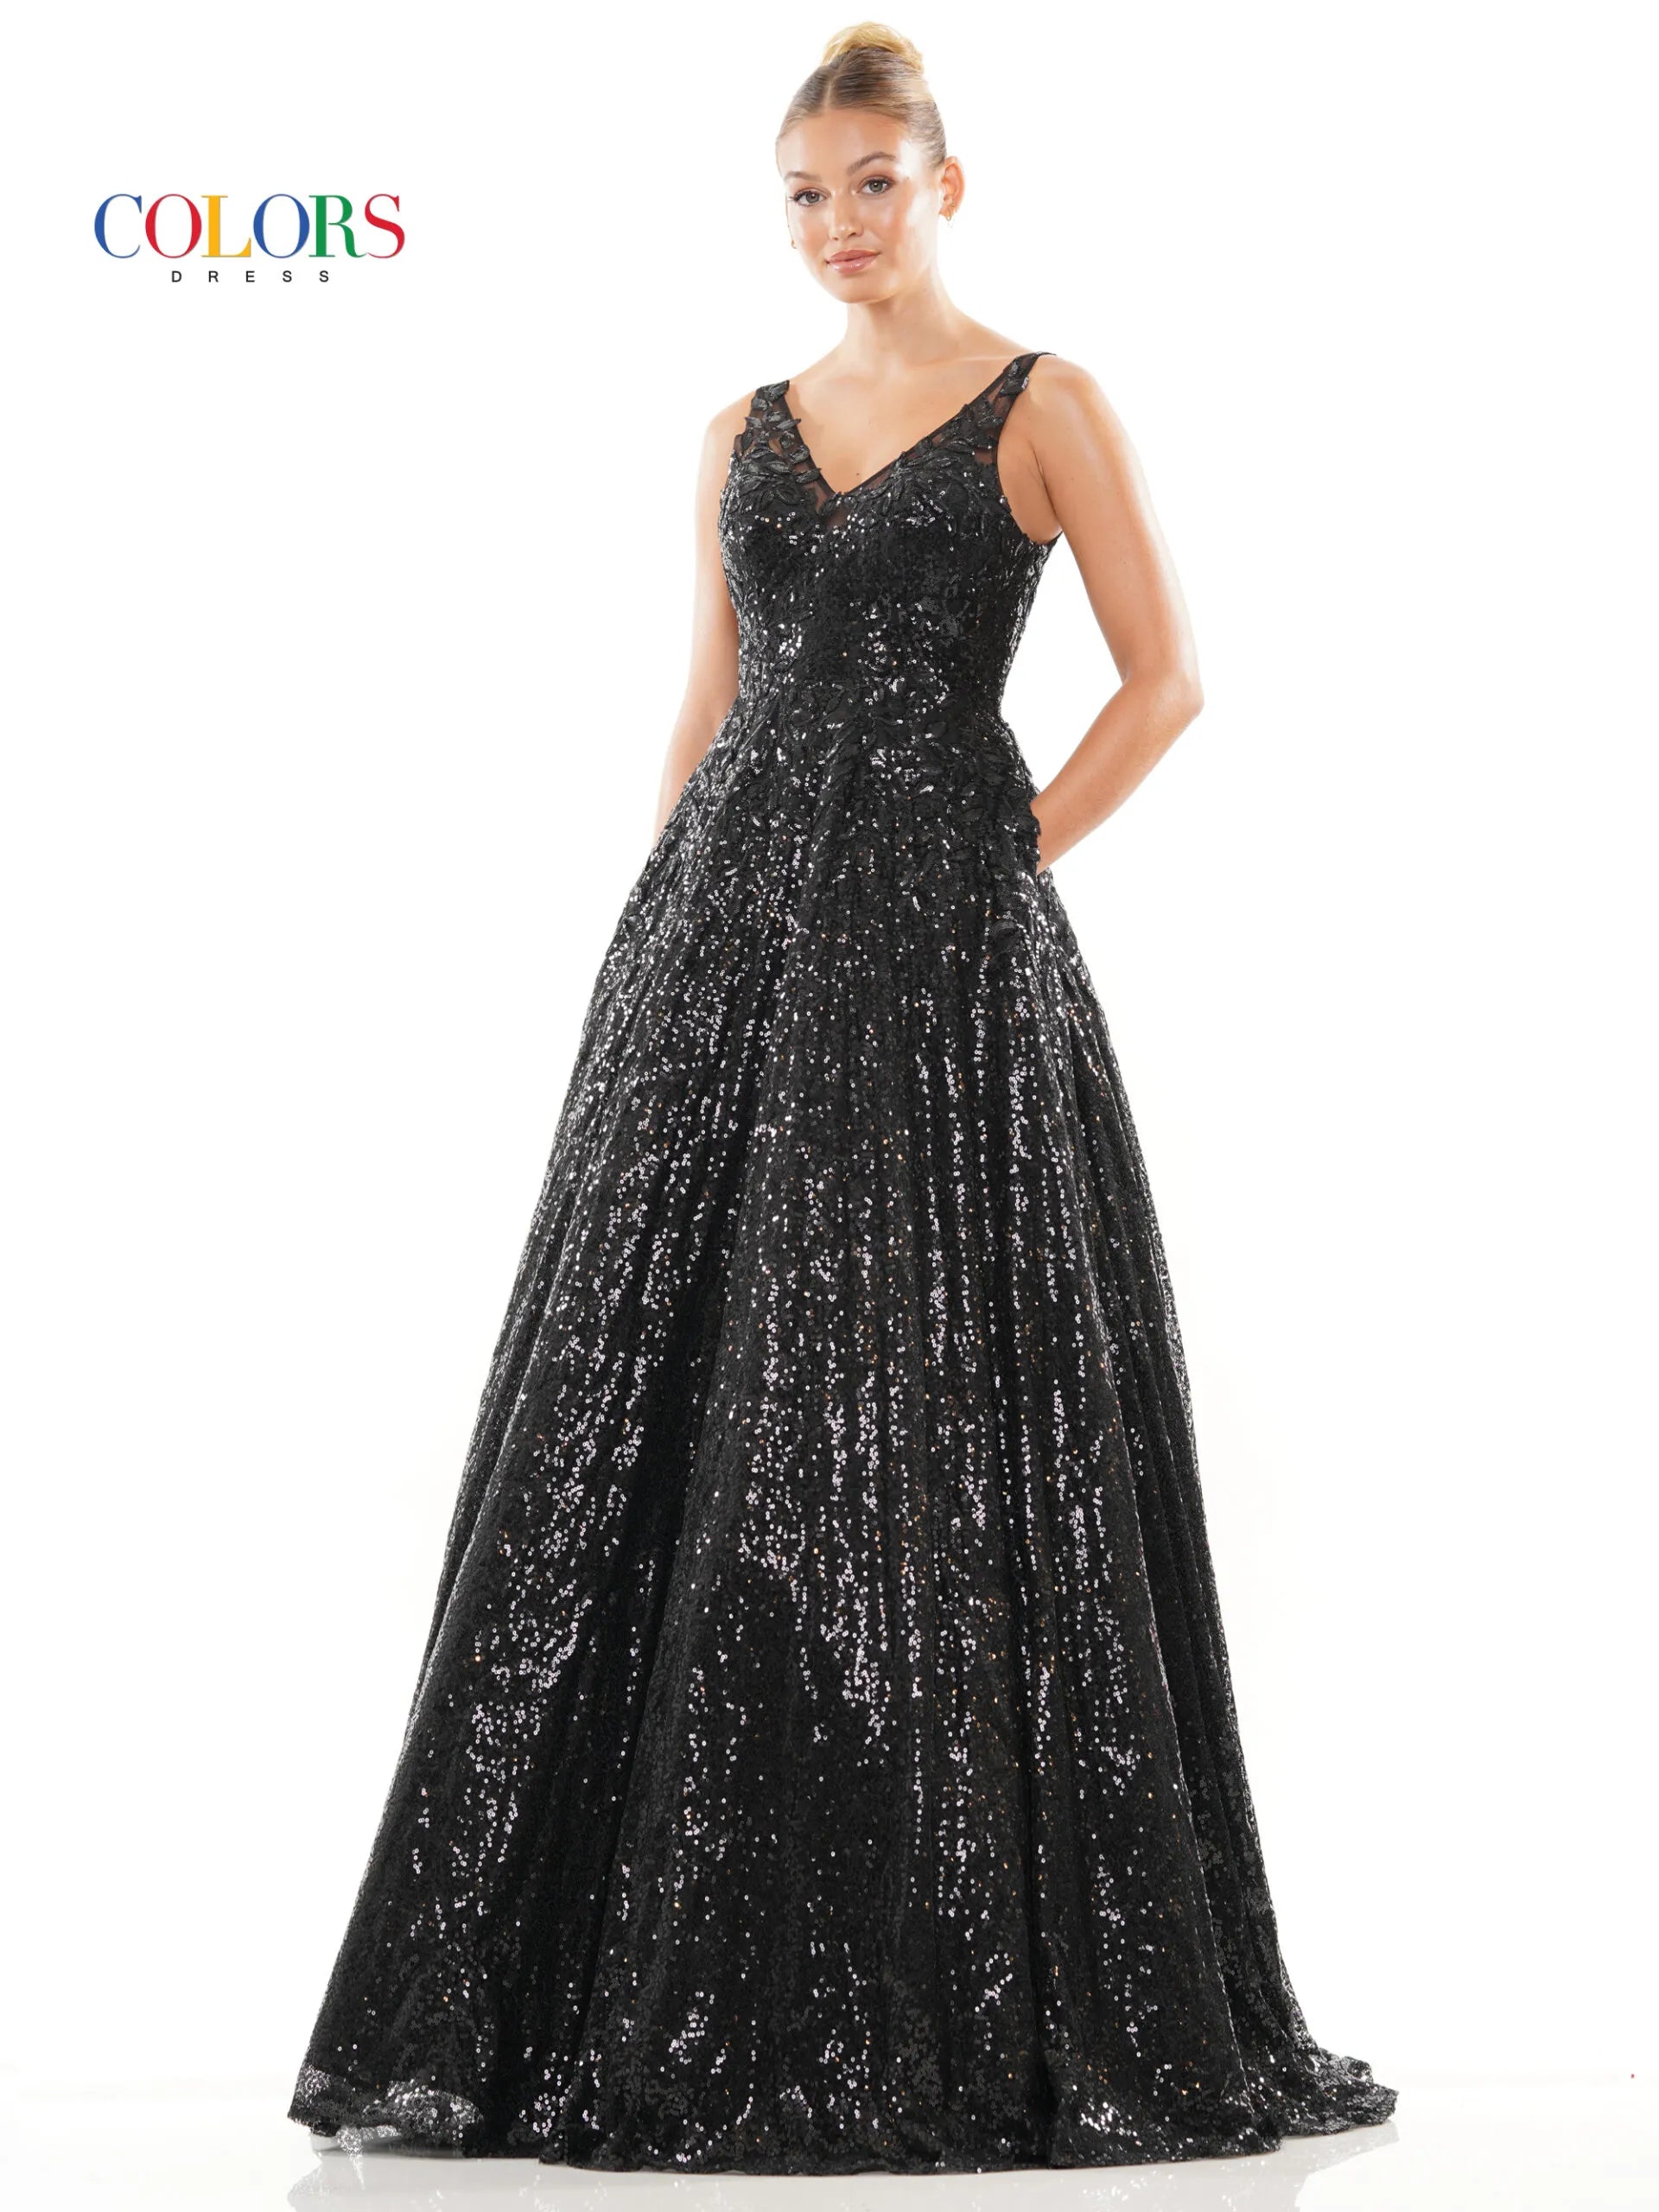 Discover elegance and sophistication with the Colors Dress 3246. This stunning A-Line Prom Dress features striking sequin lace and a flattering V-neckline. The added benefit of pockets makes it perfect for any formal occasion. Complete with a sheer back for a touch of allure.  Sizes: 0-22  Colors: Black, Light Blue, Lavender, Pink